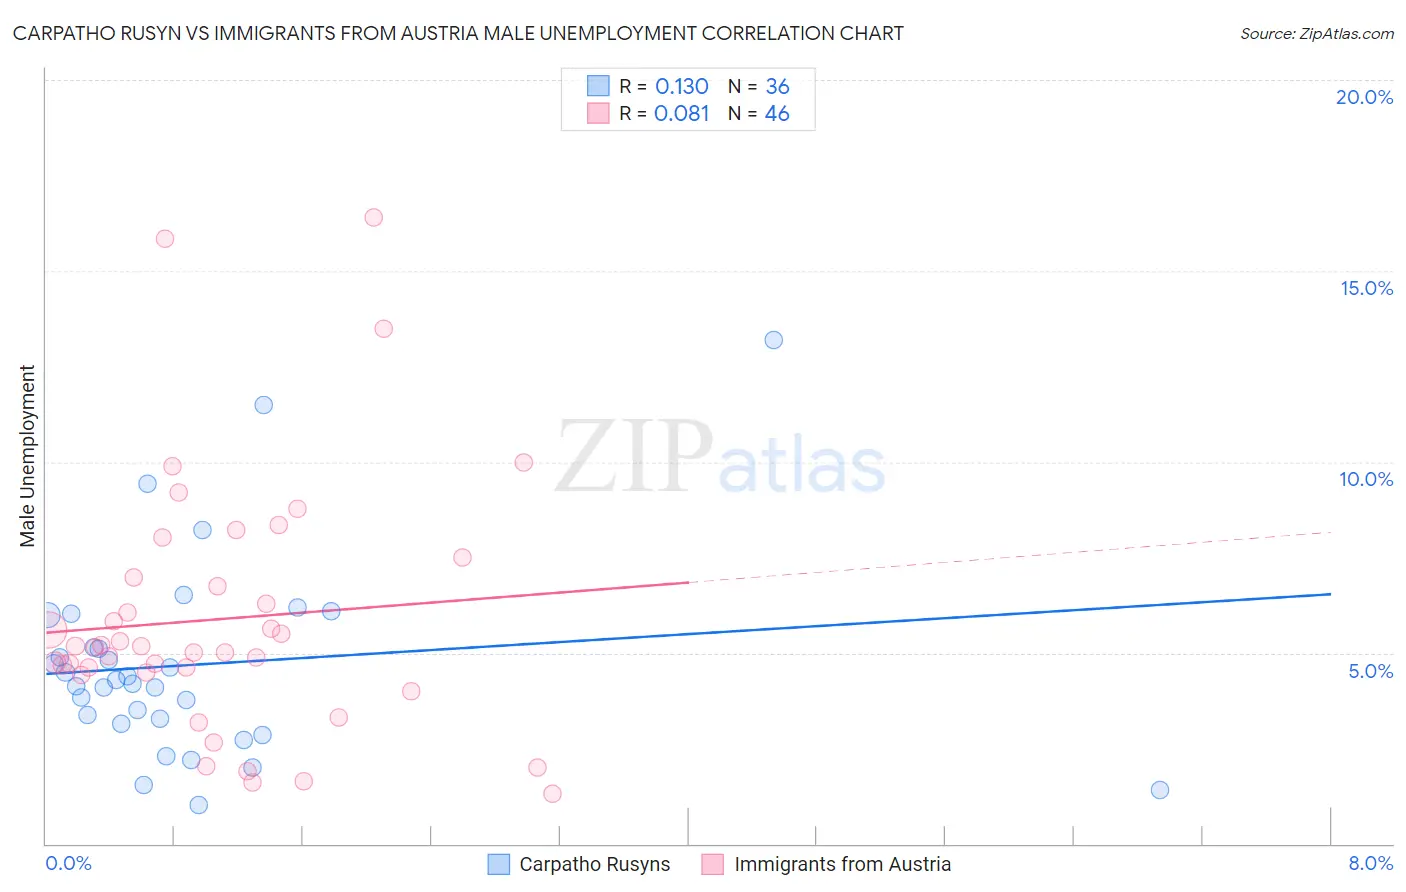 Carpatho Rusyn vs Immigrants from Austria Male Unemployment